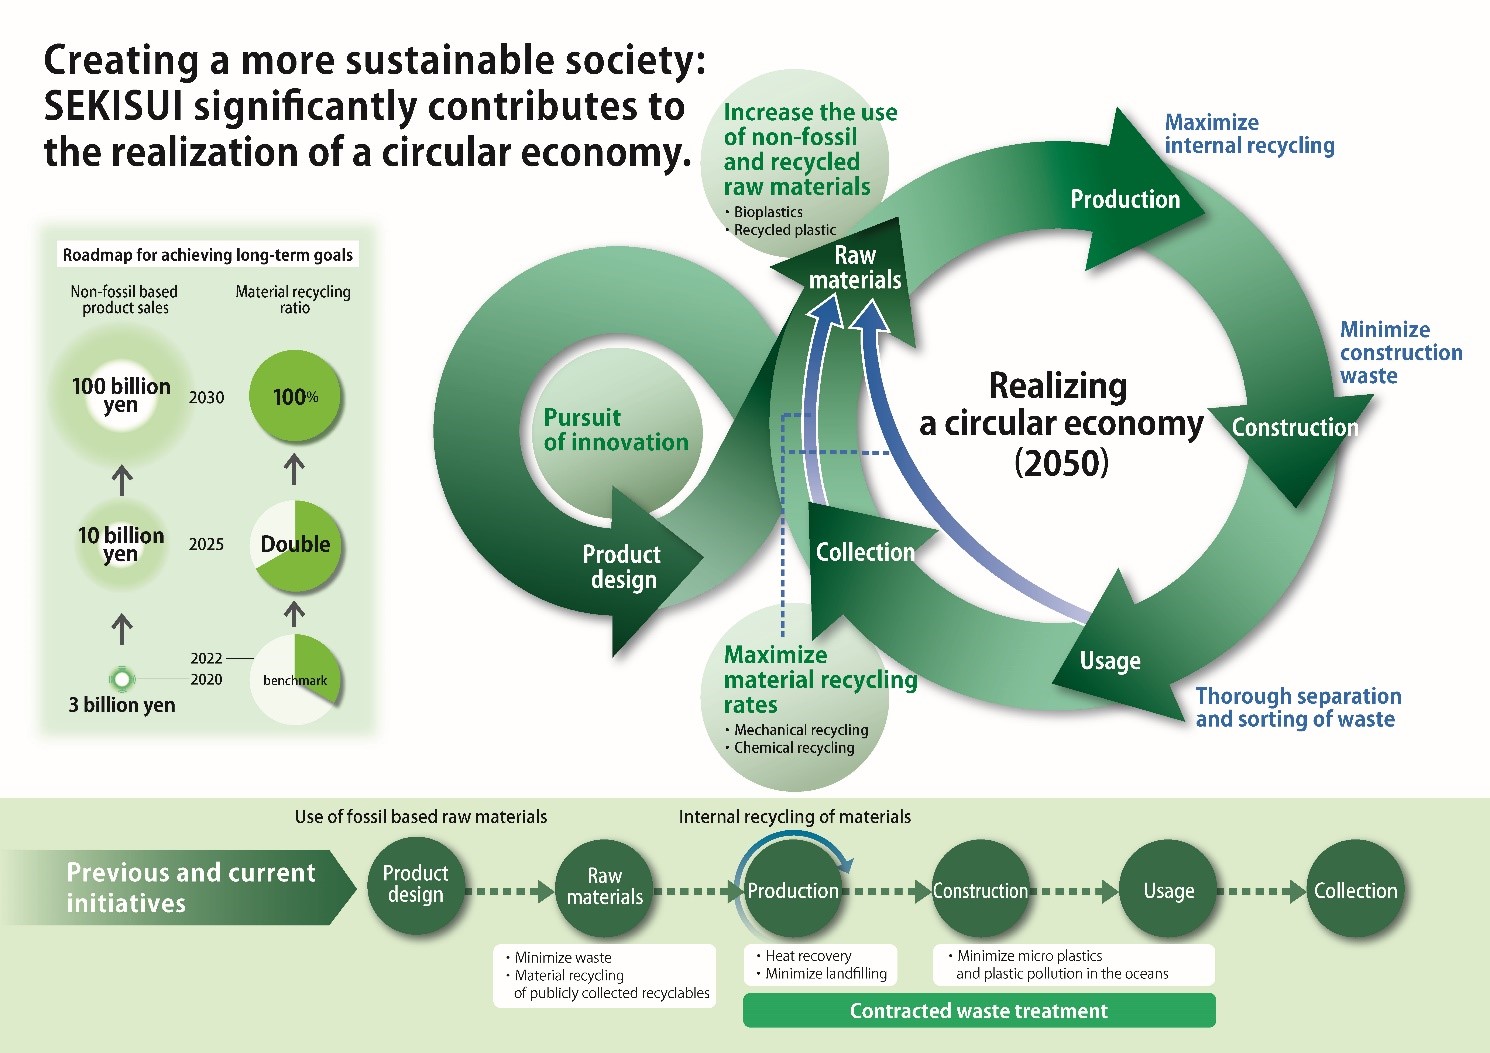 Figure: Image of the SEKISUI CHEMICAL Group resource recycling strategy